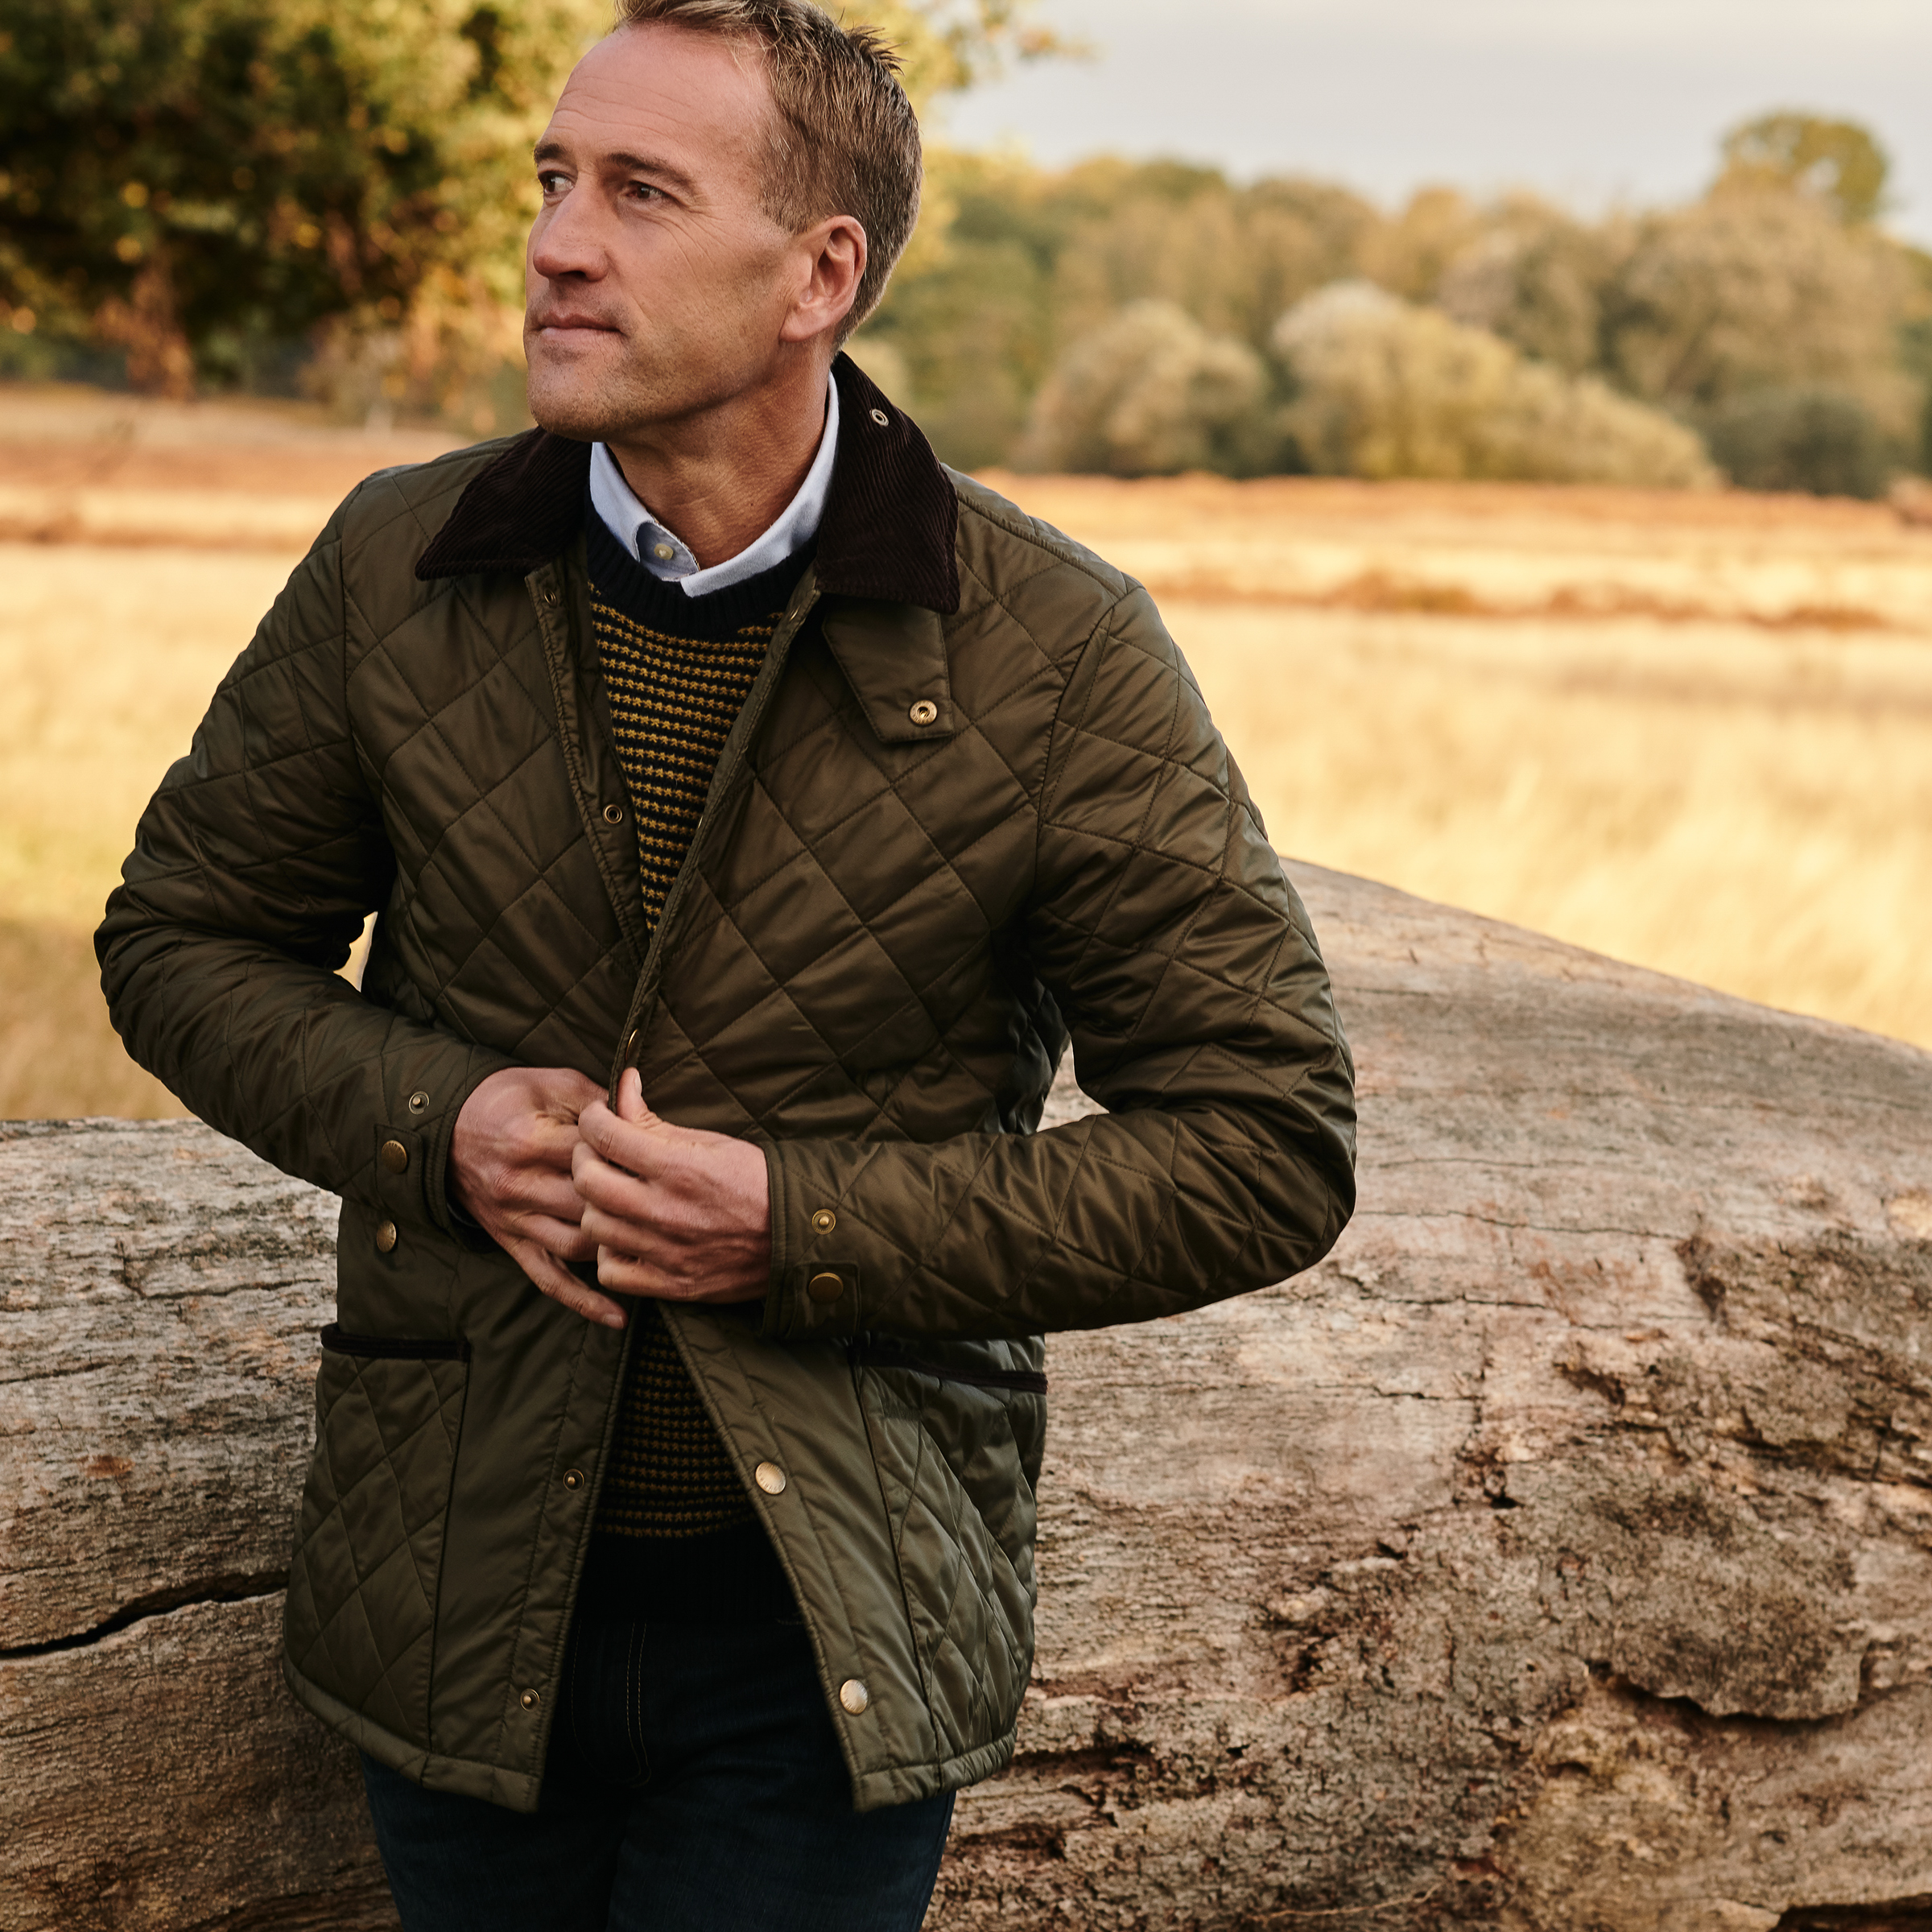 barbour icons liddesdale quilted jacket